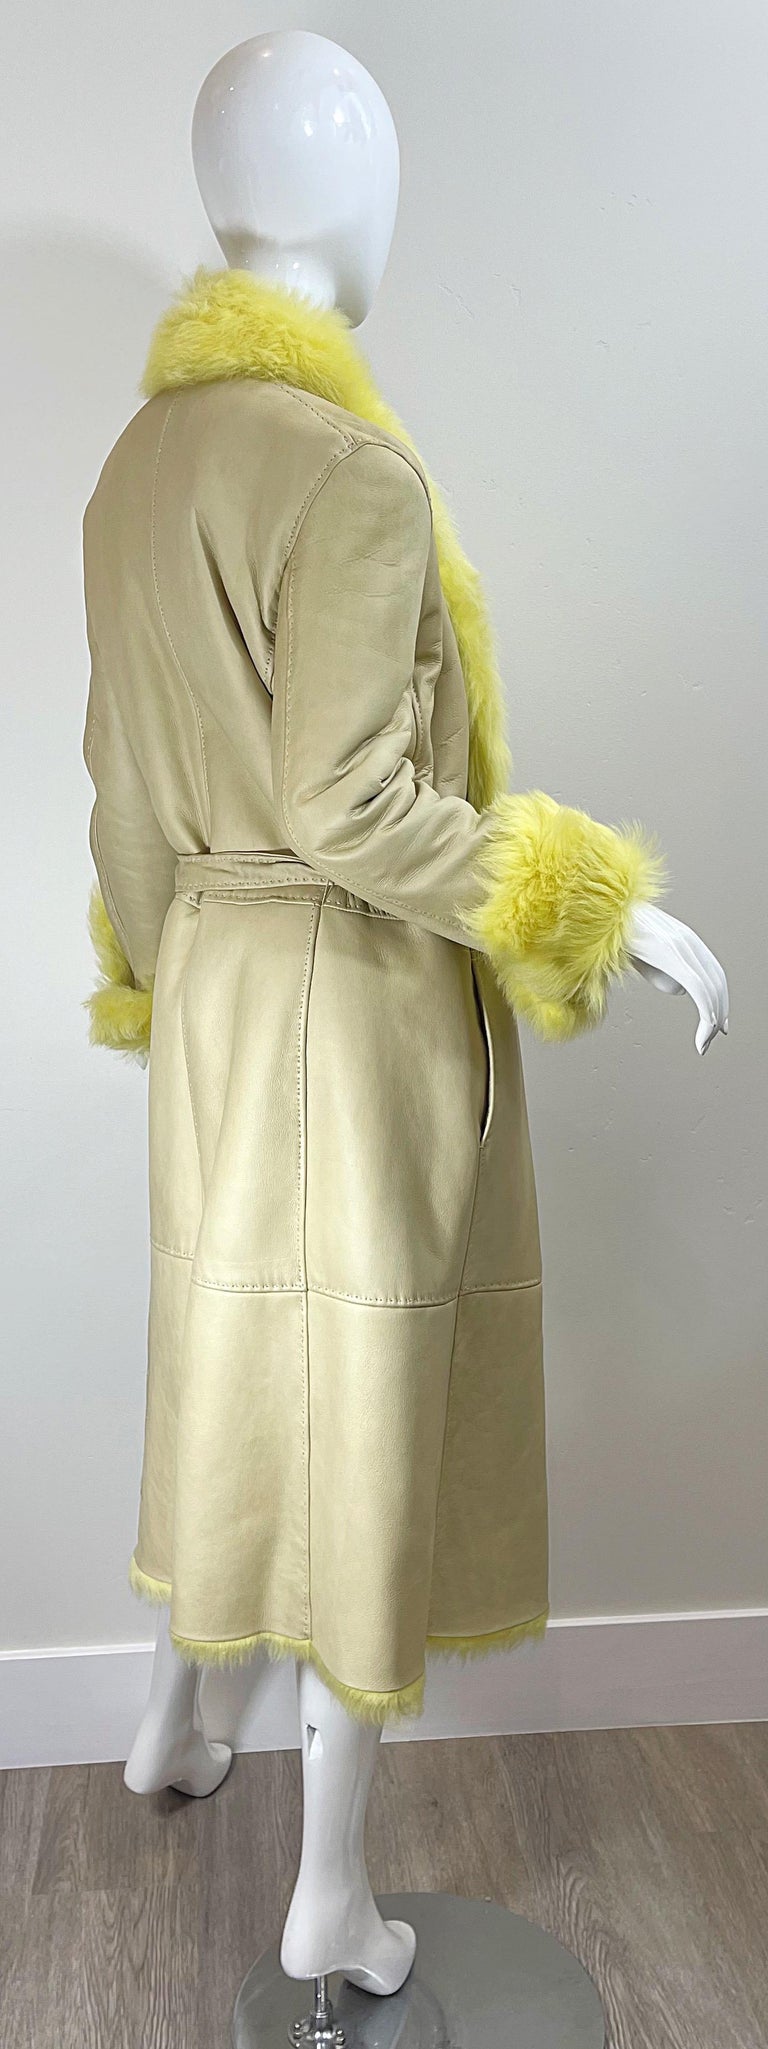 1990s Gianni Versace Tan Leather Yellow Shearling Fur Vintage Trench Coat Jacket For Sale 10